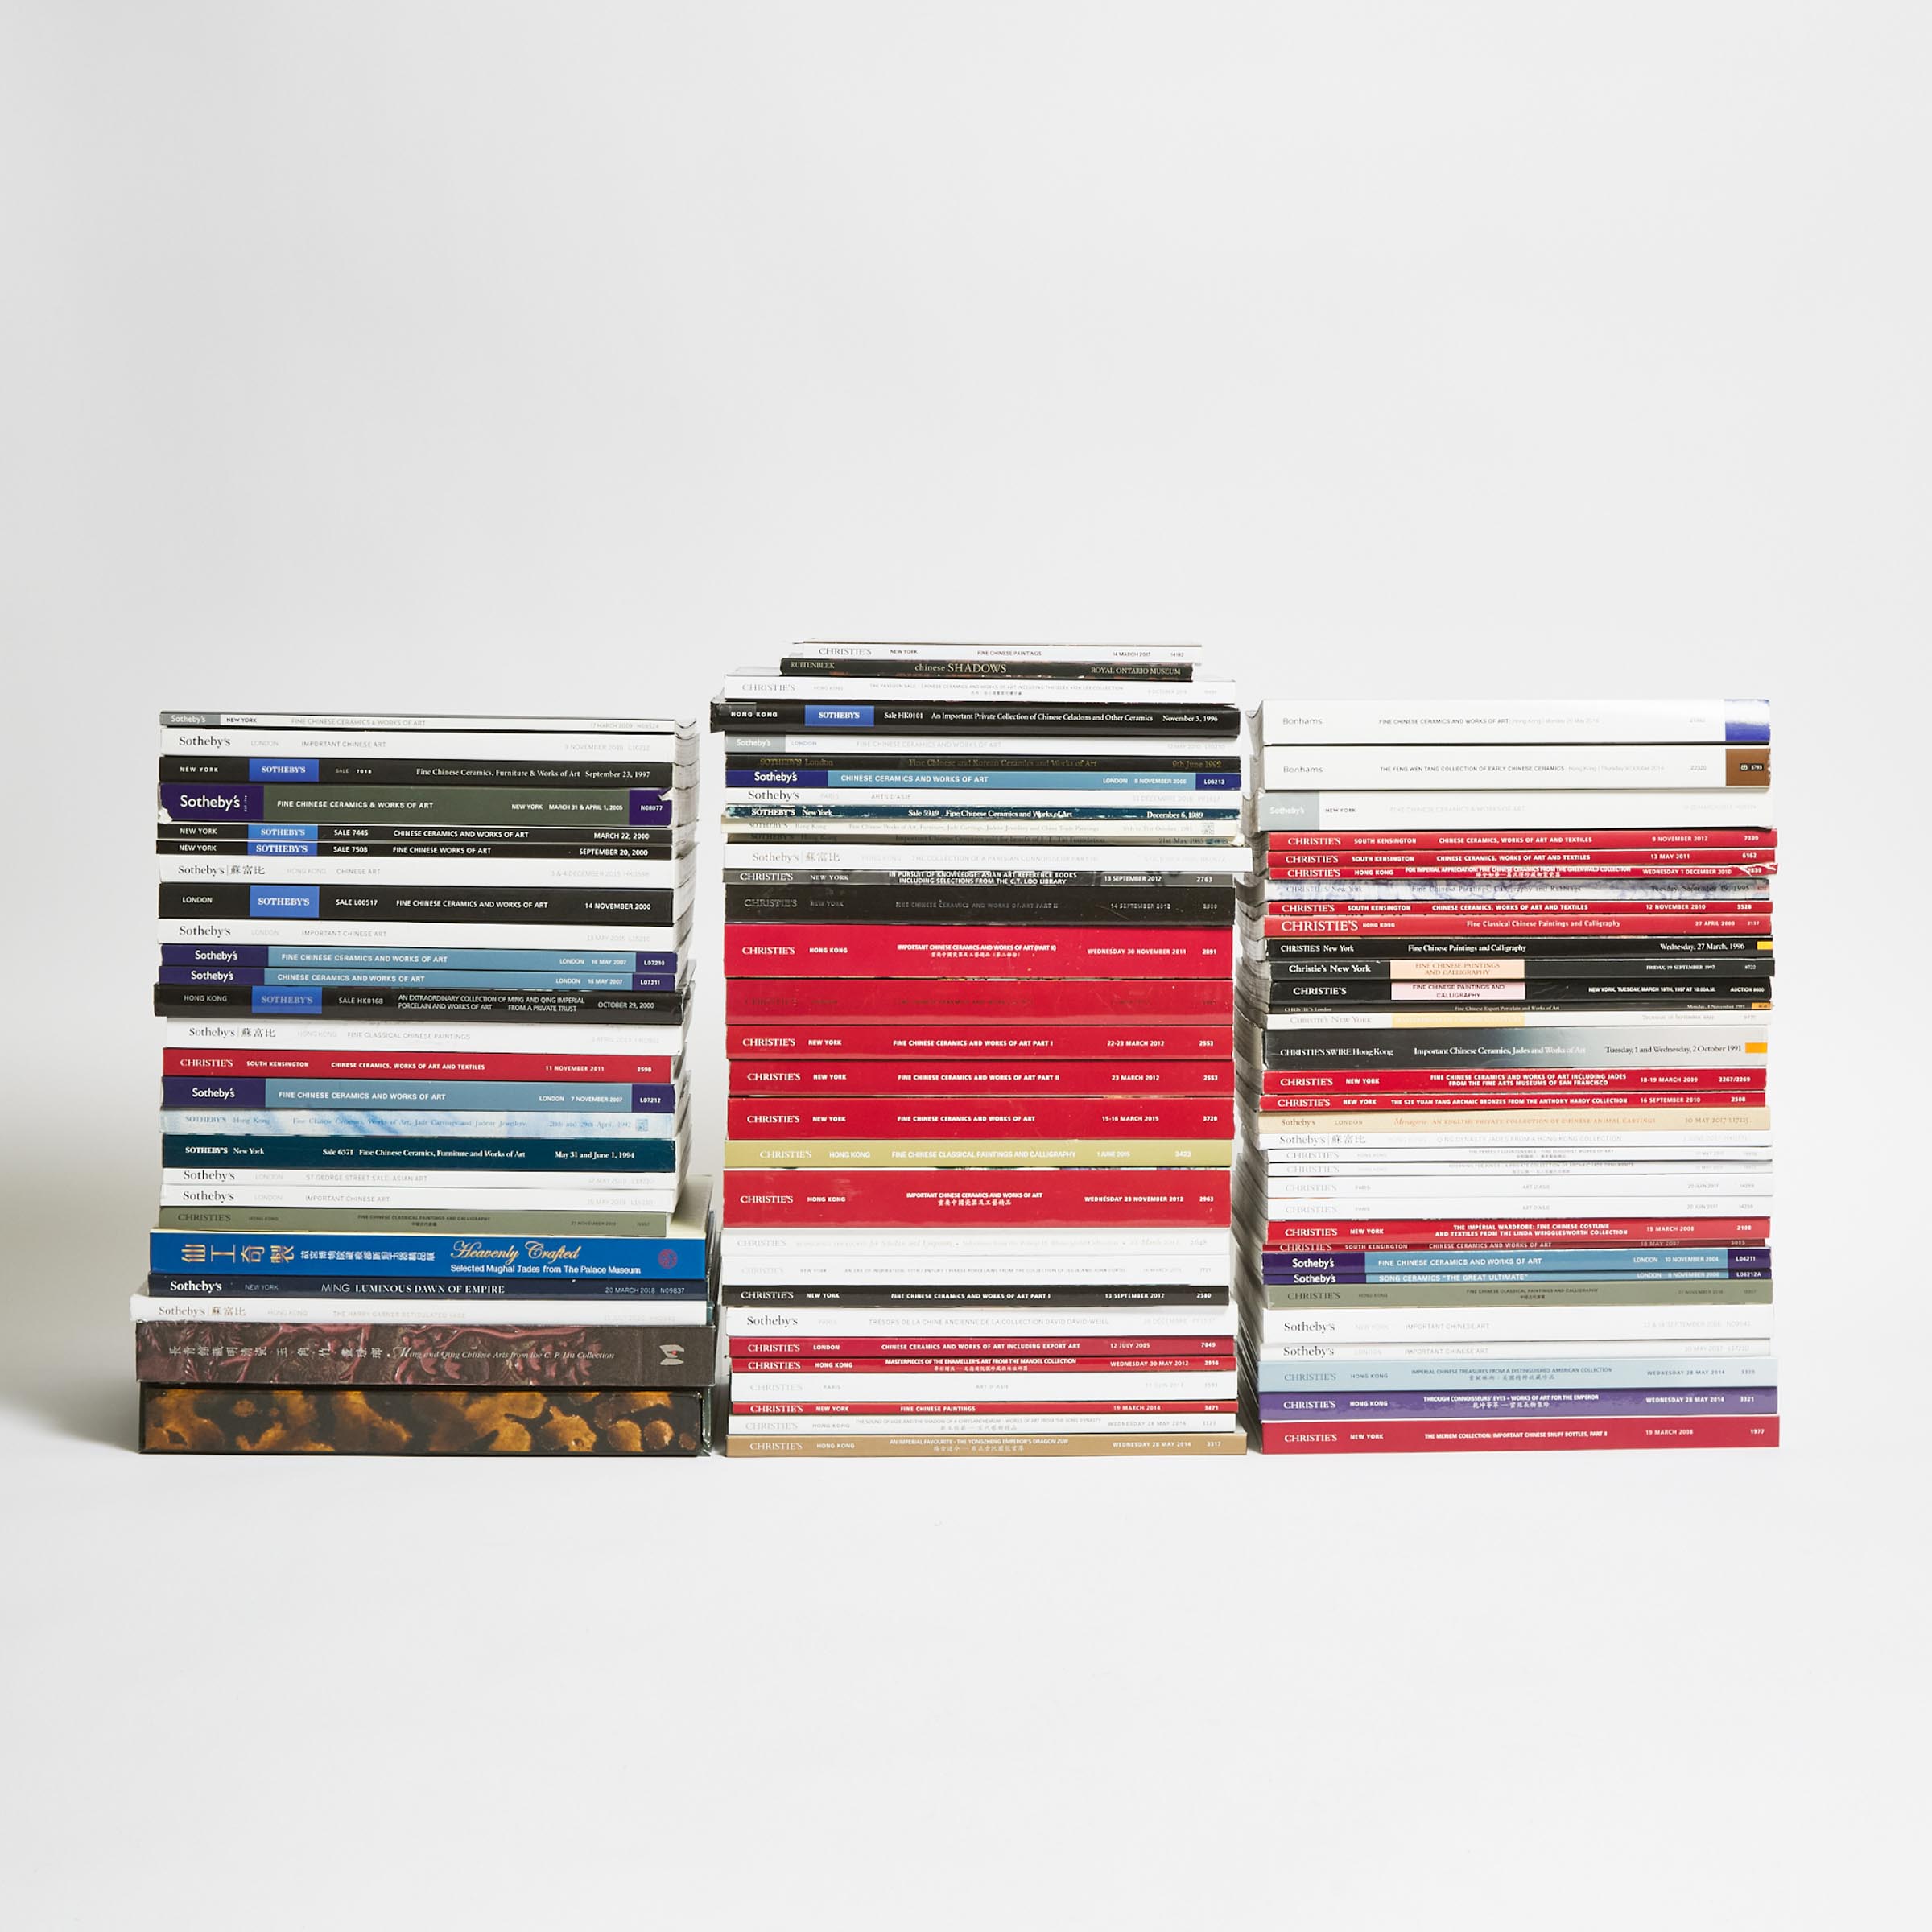 A Group of Eighty-Nine Christie's, Sotheby's, and other Chinese Art Catalogues and Reference Books, 1985-2019